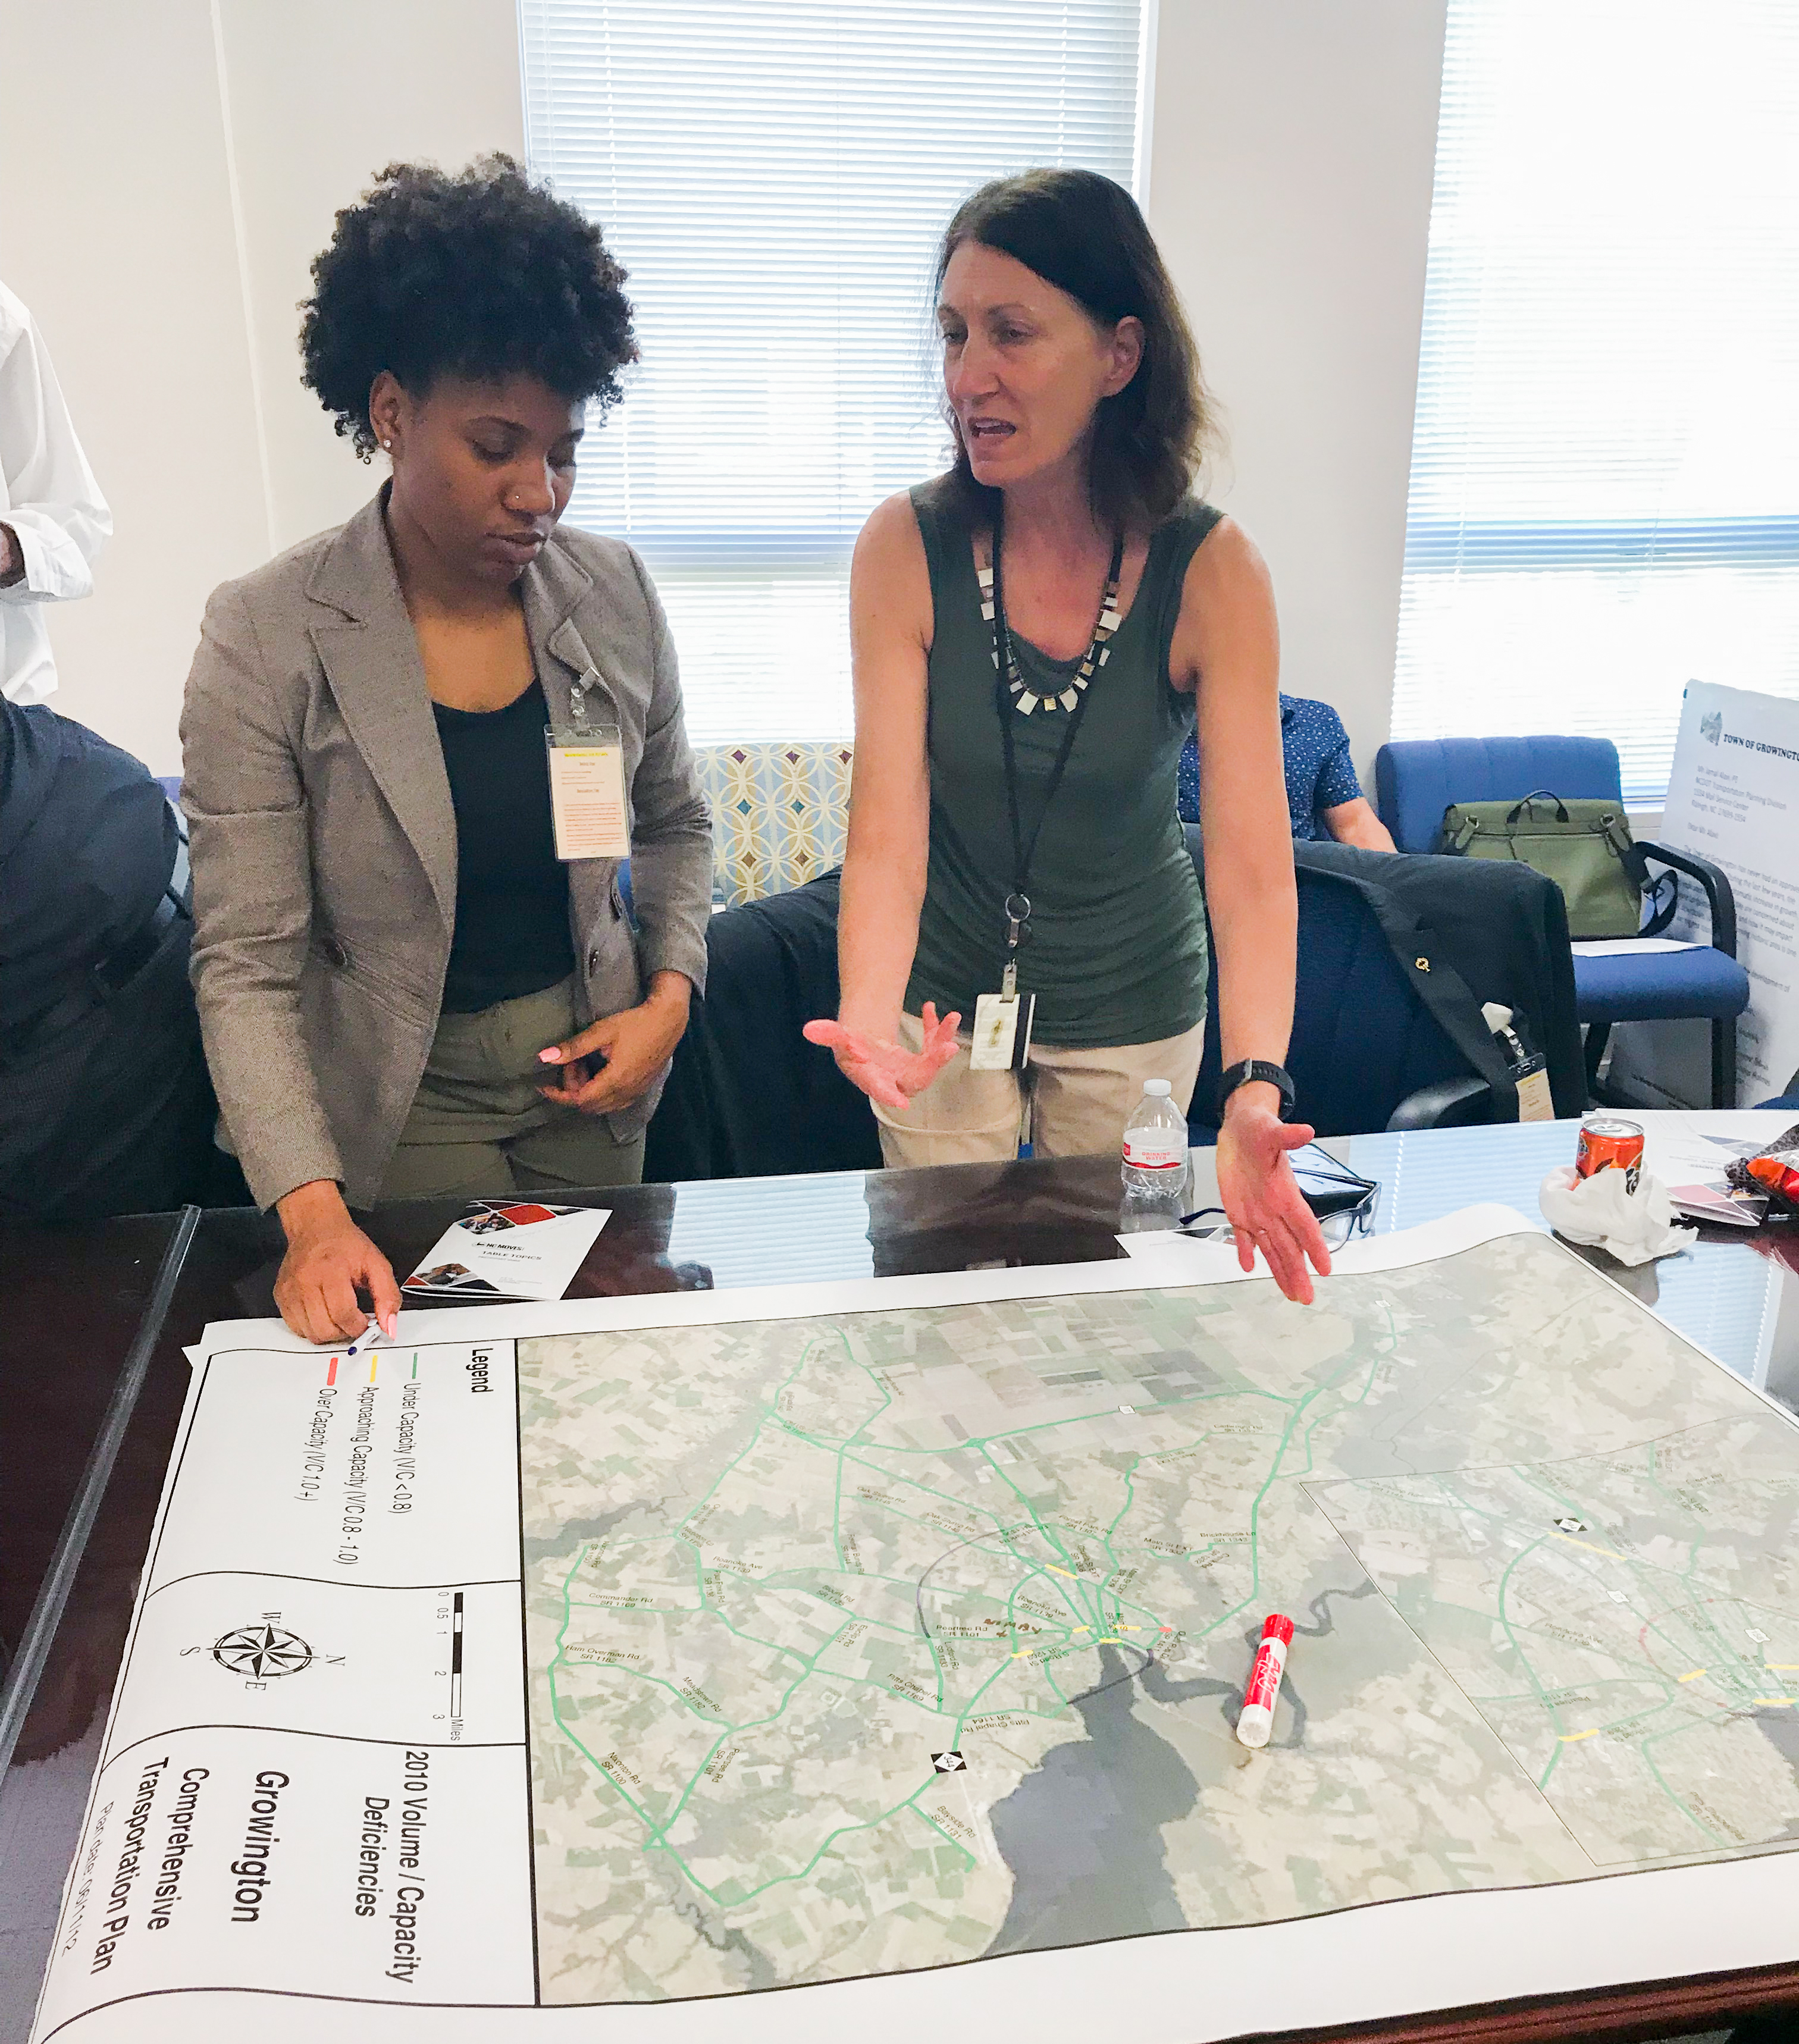 An NCDOT HBCU fellow speaks to a staff person about a project